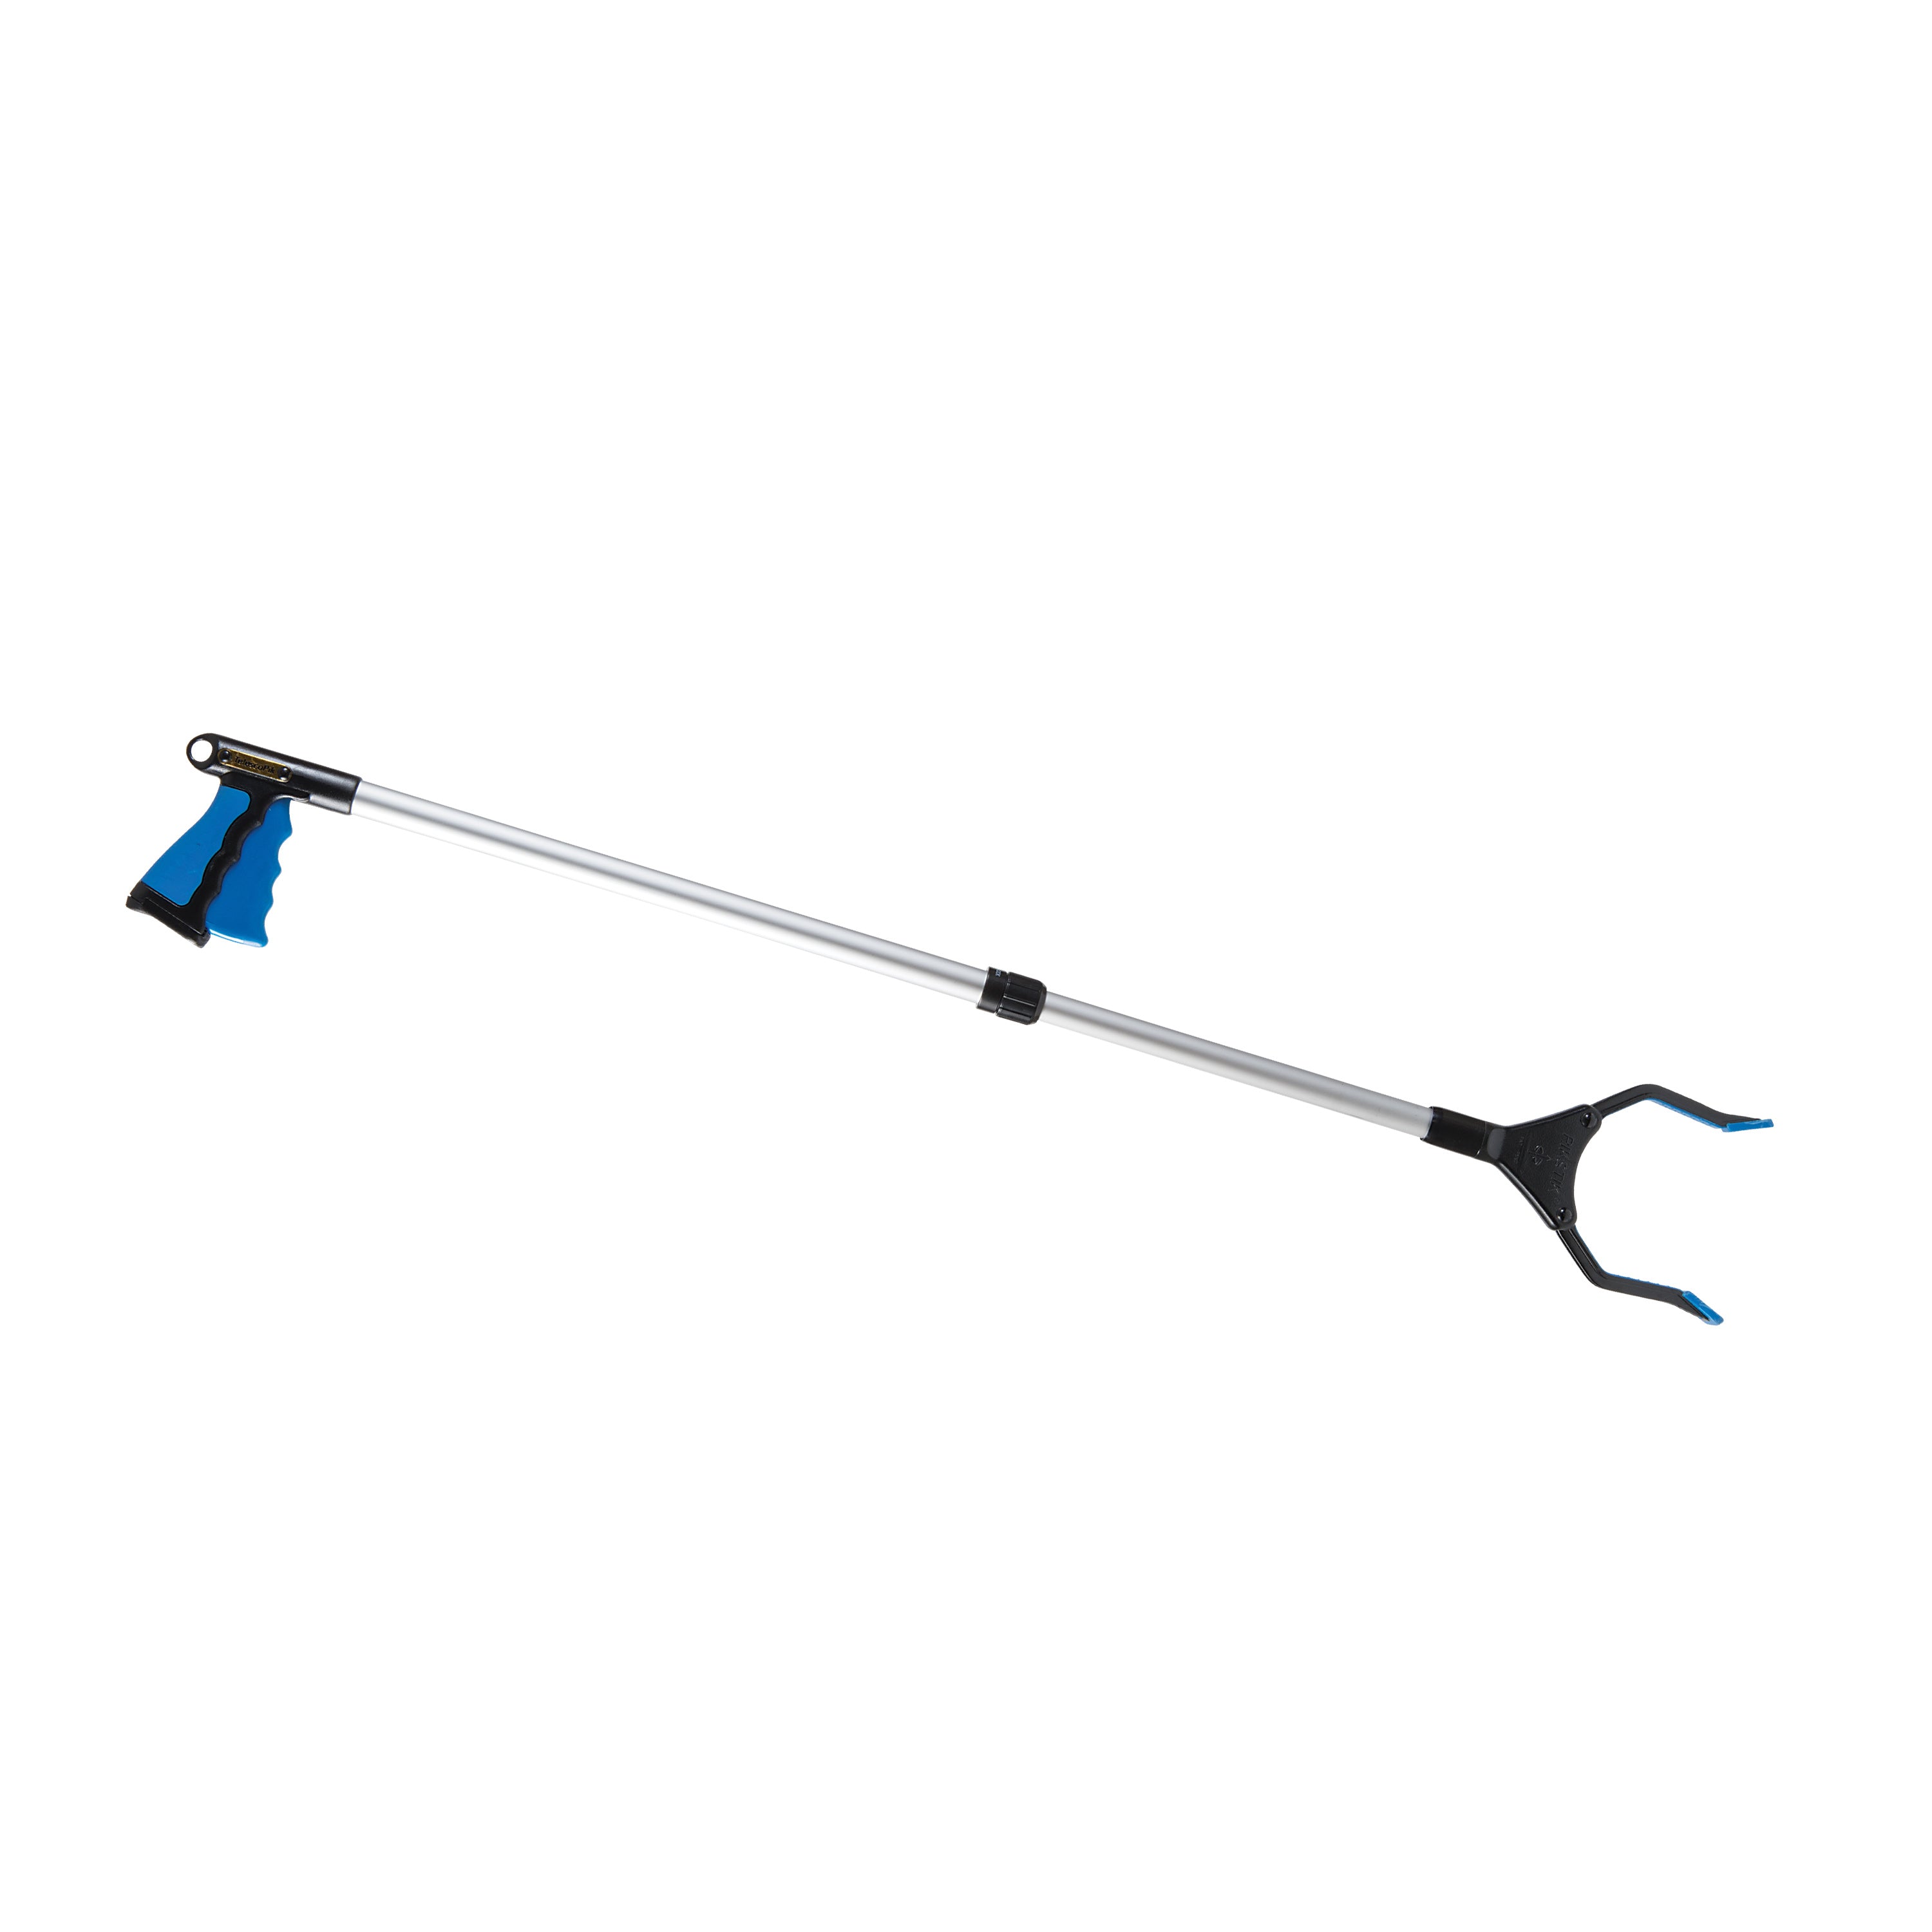 HealthSmart Adjustable Length Reacher with Rotating Jaw AM-640-1800-0000